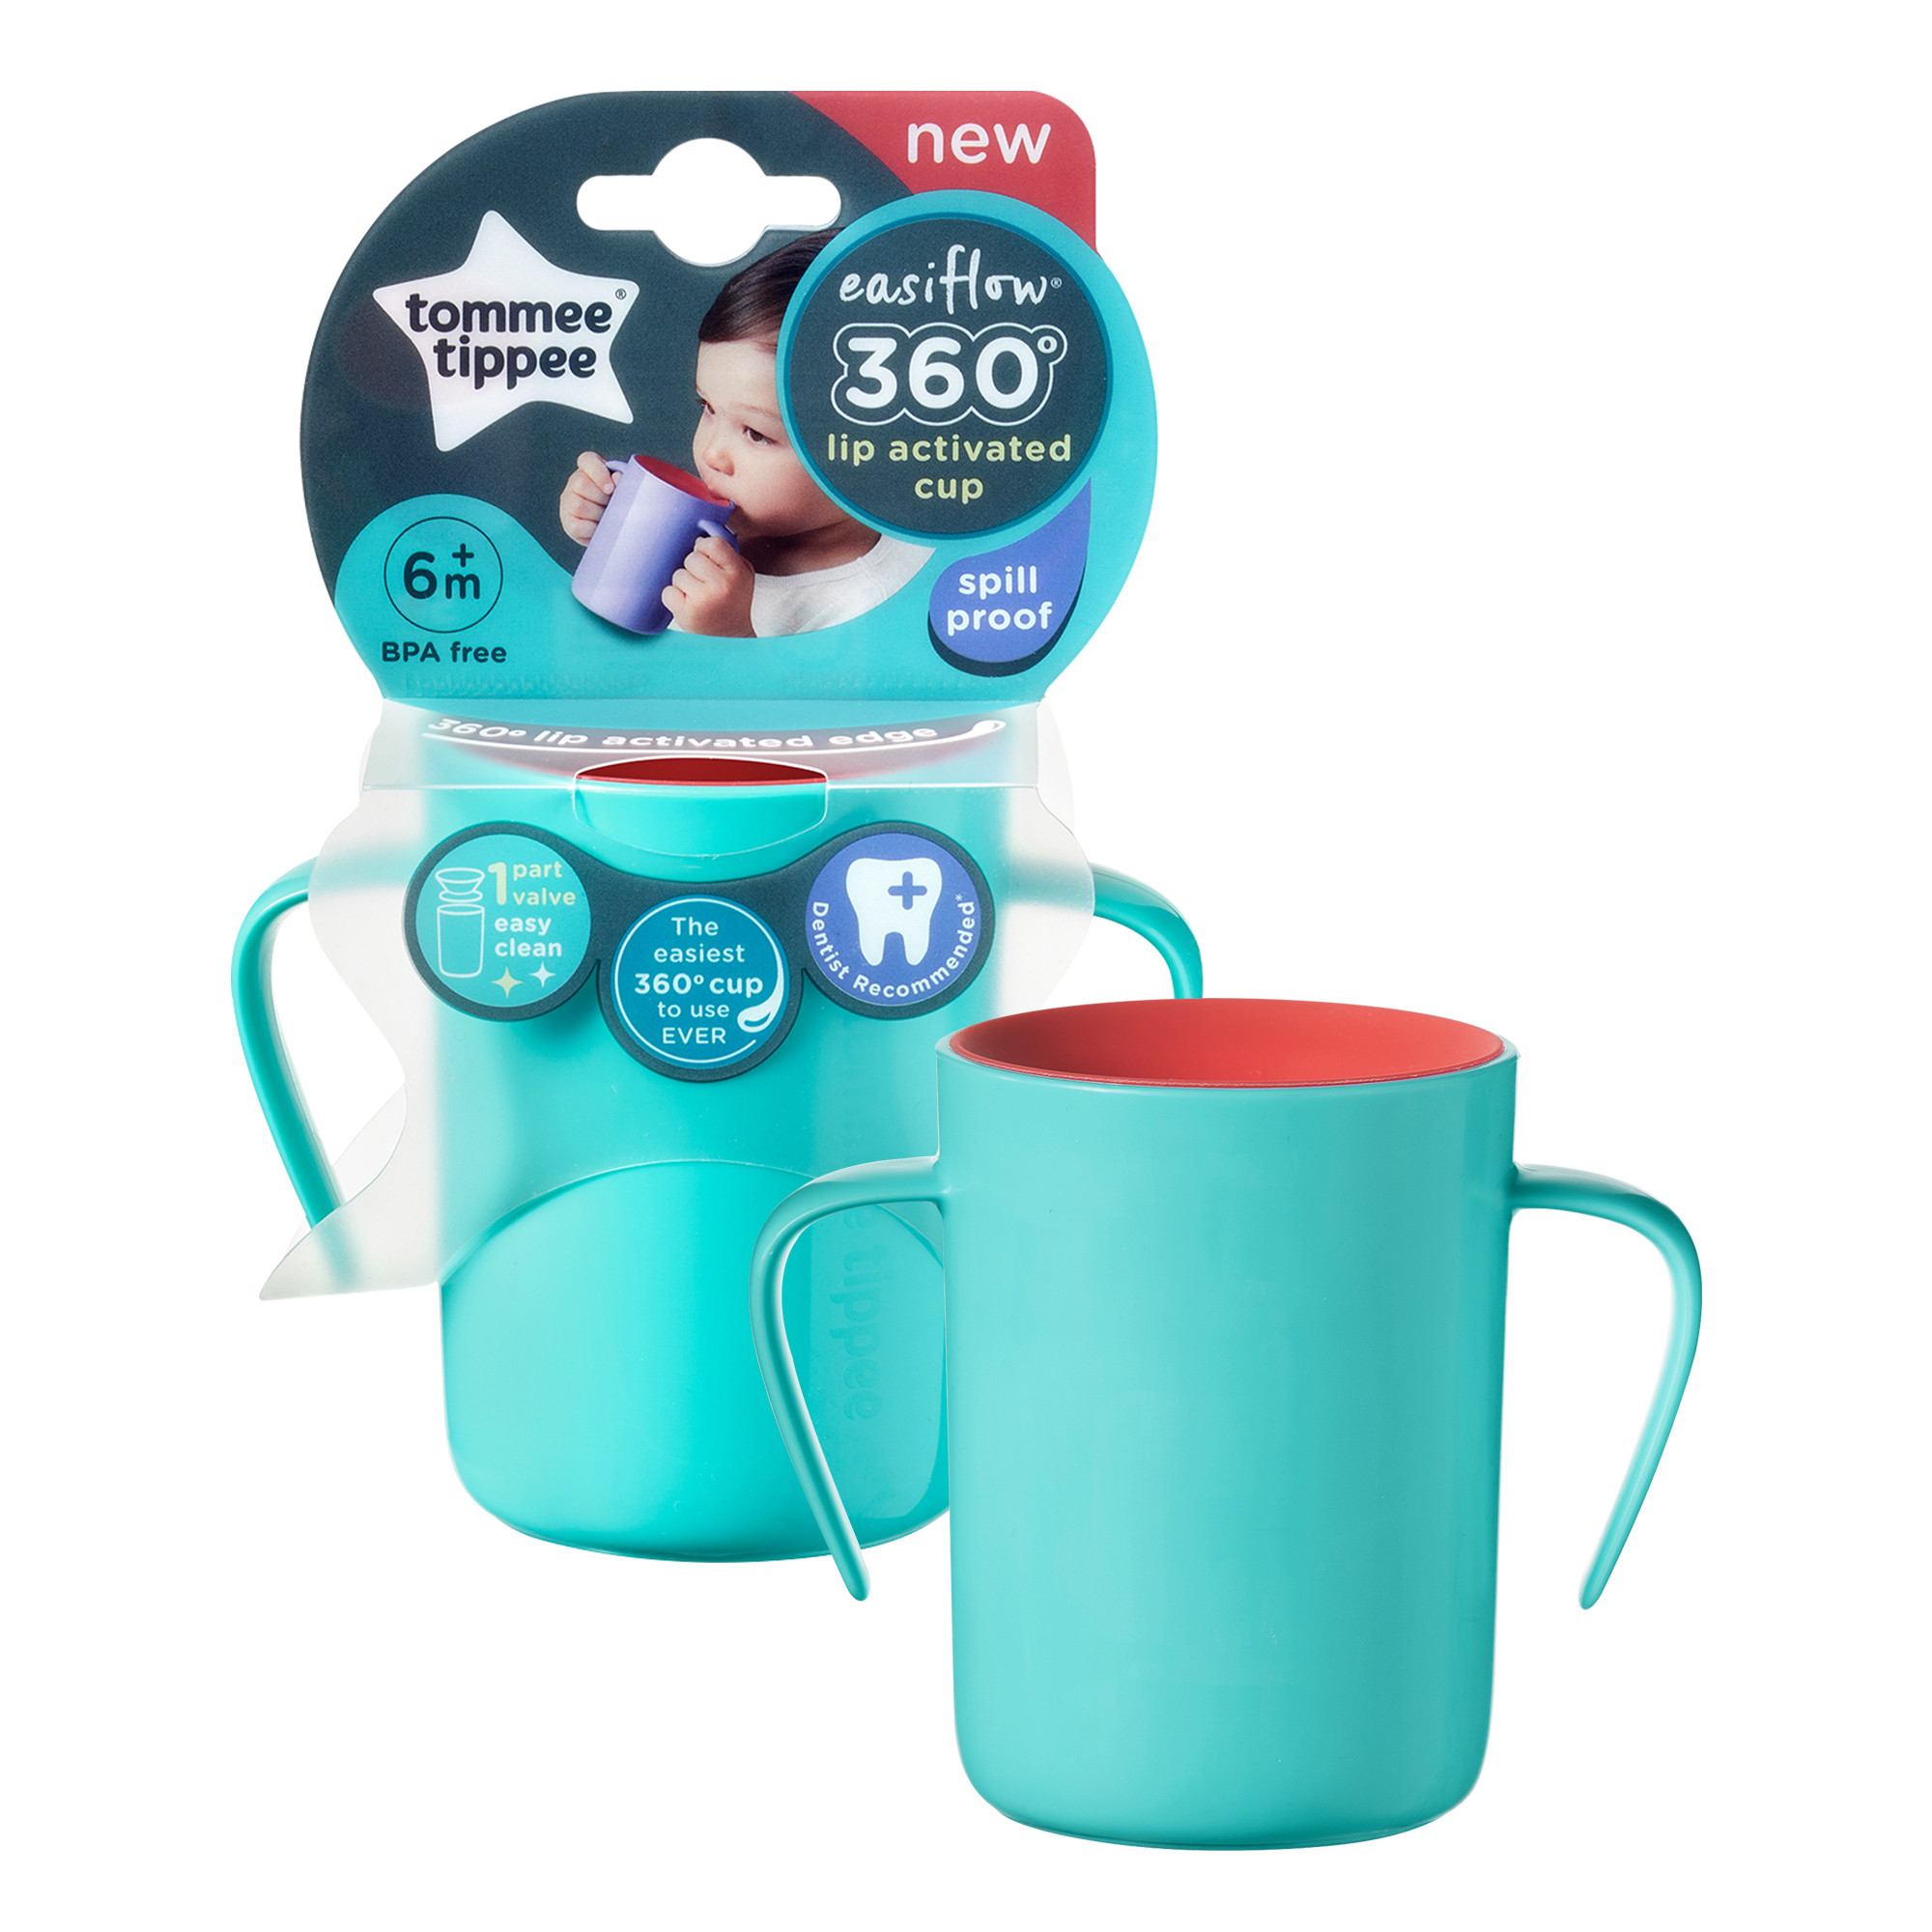 Tommee Tippee Explora Truly Spill Proof Sippy Cup Review